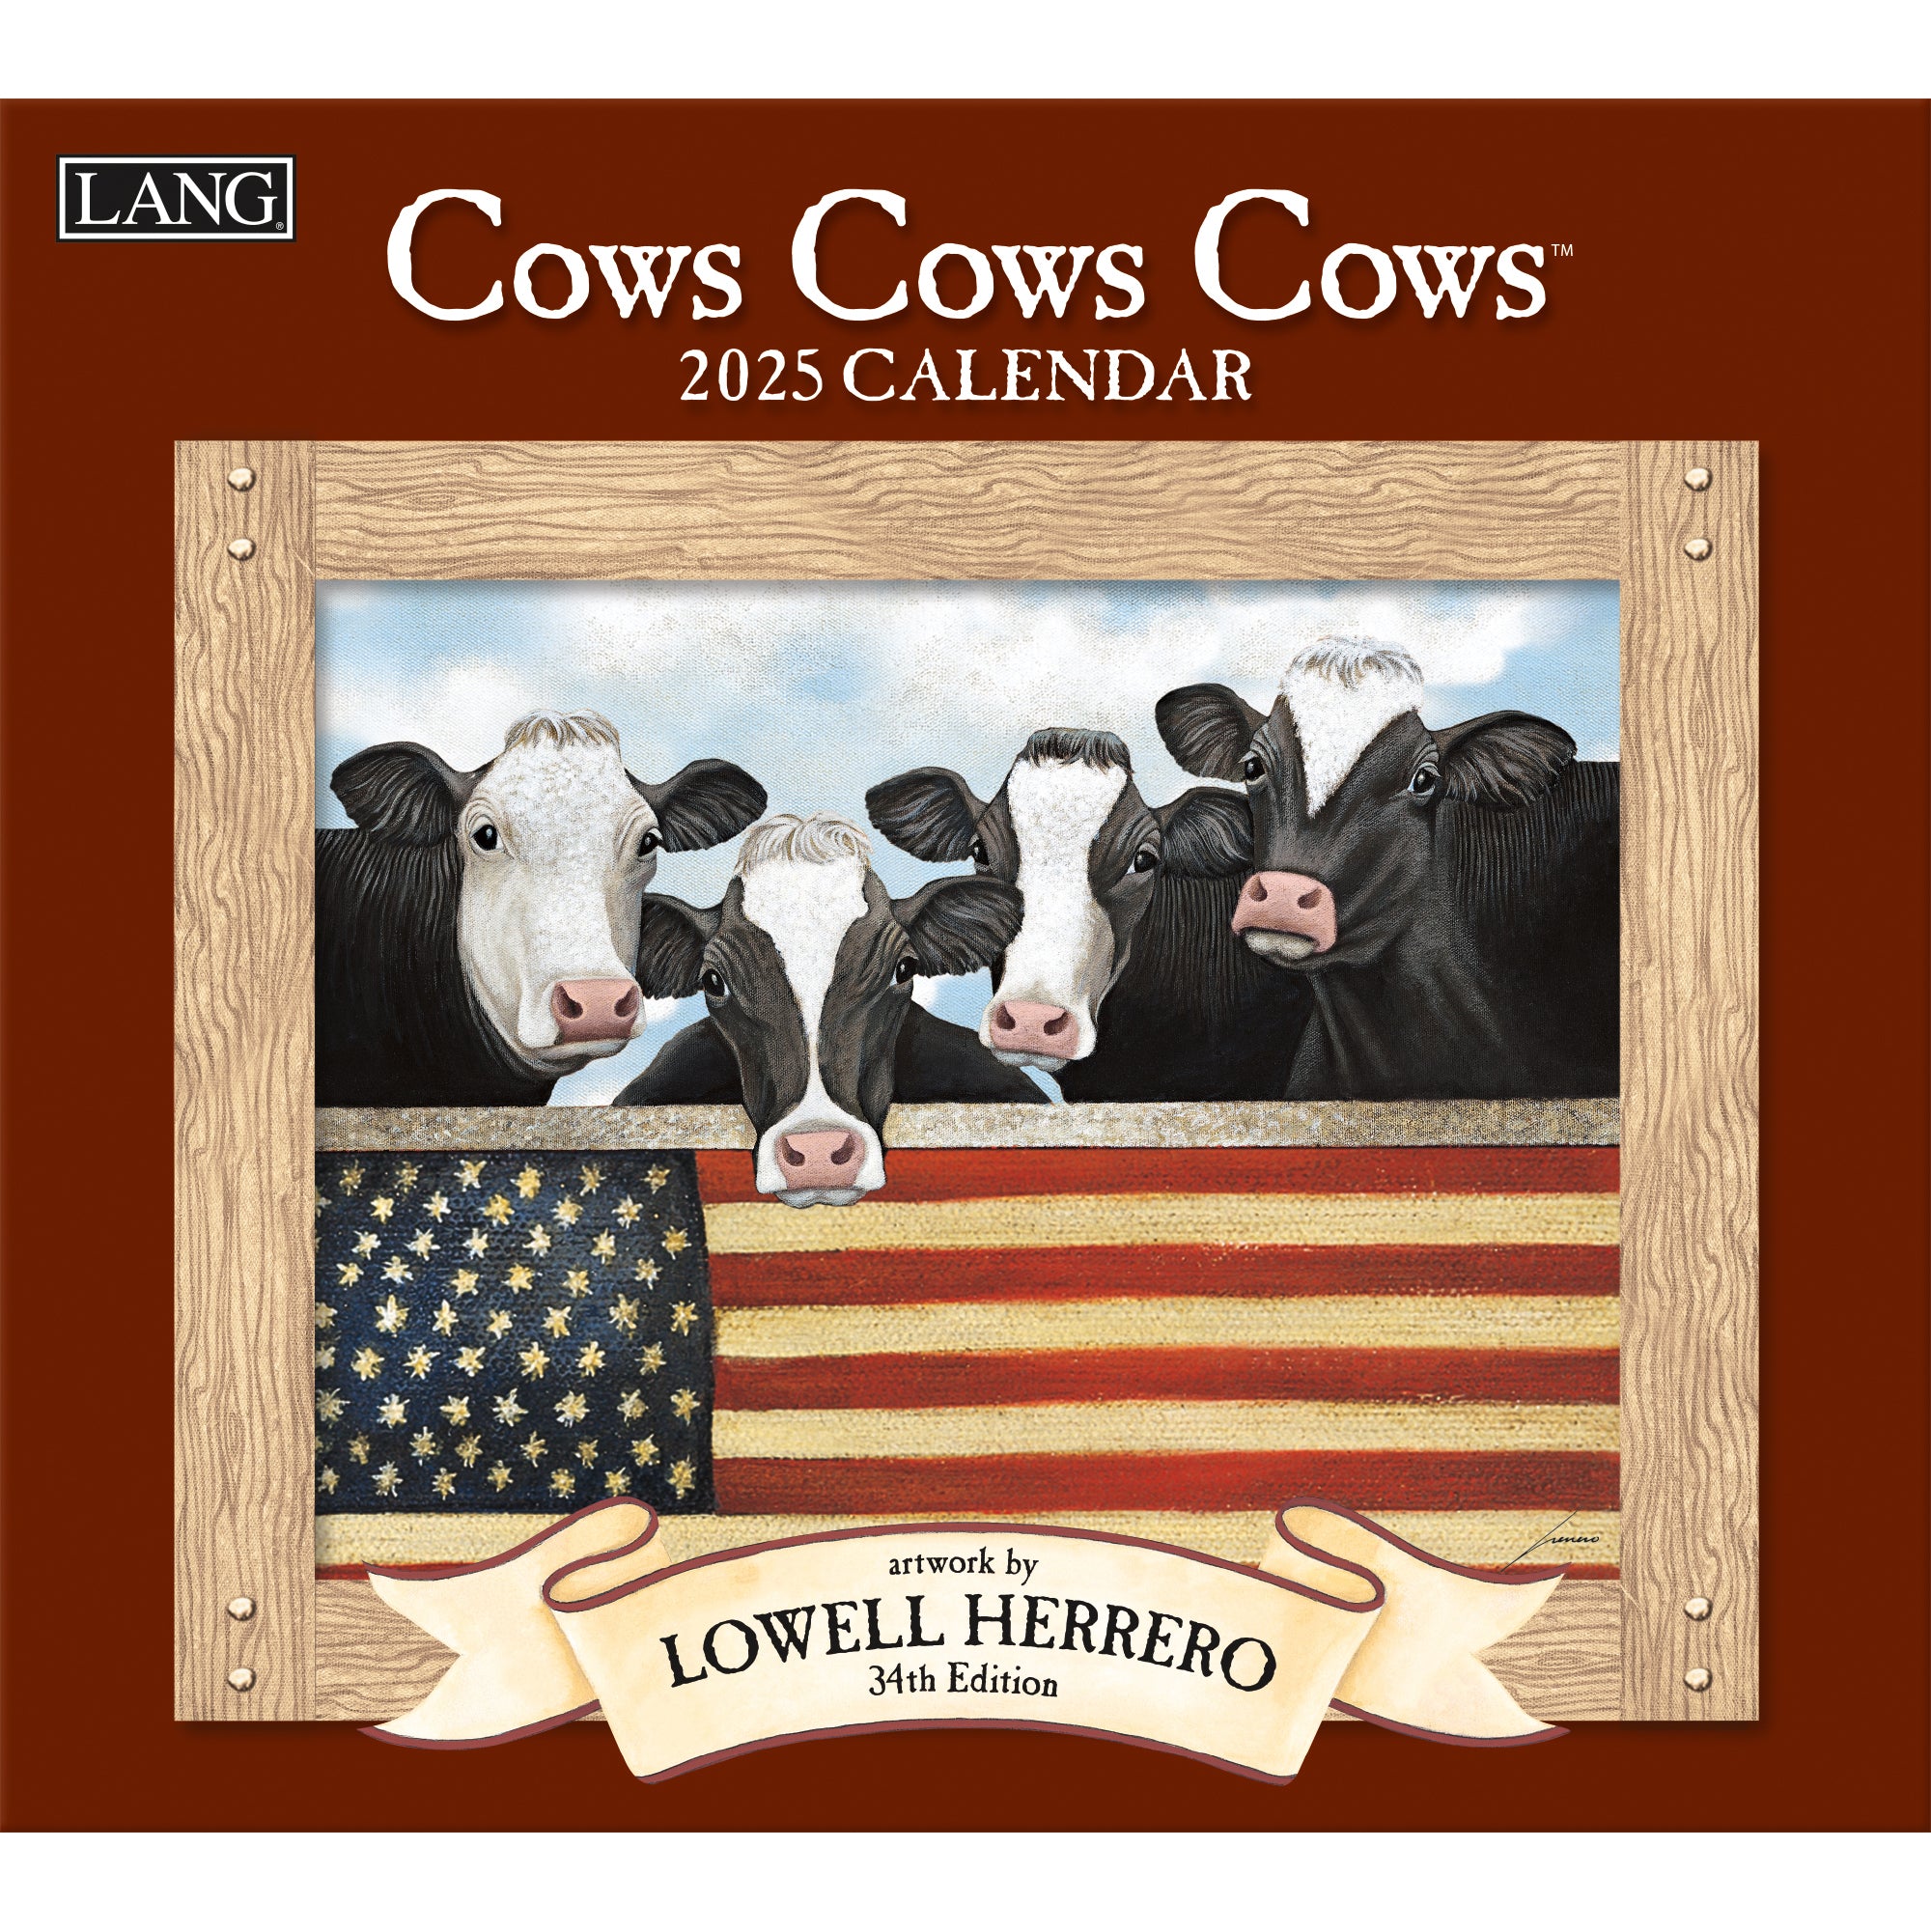 2025 LANG Cows Cows Cows By Lowell Herrero - Deluxe Wall Calendar